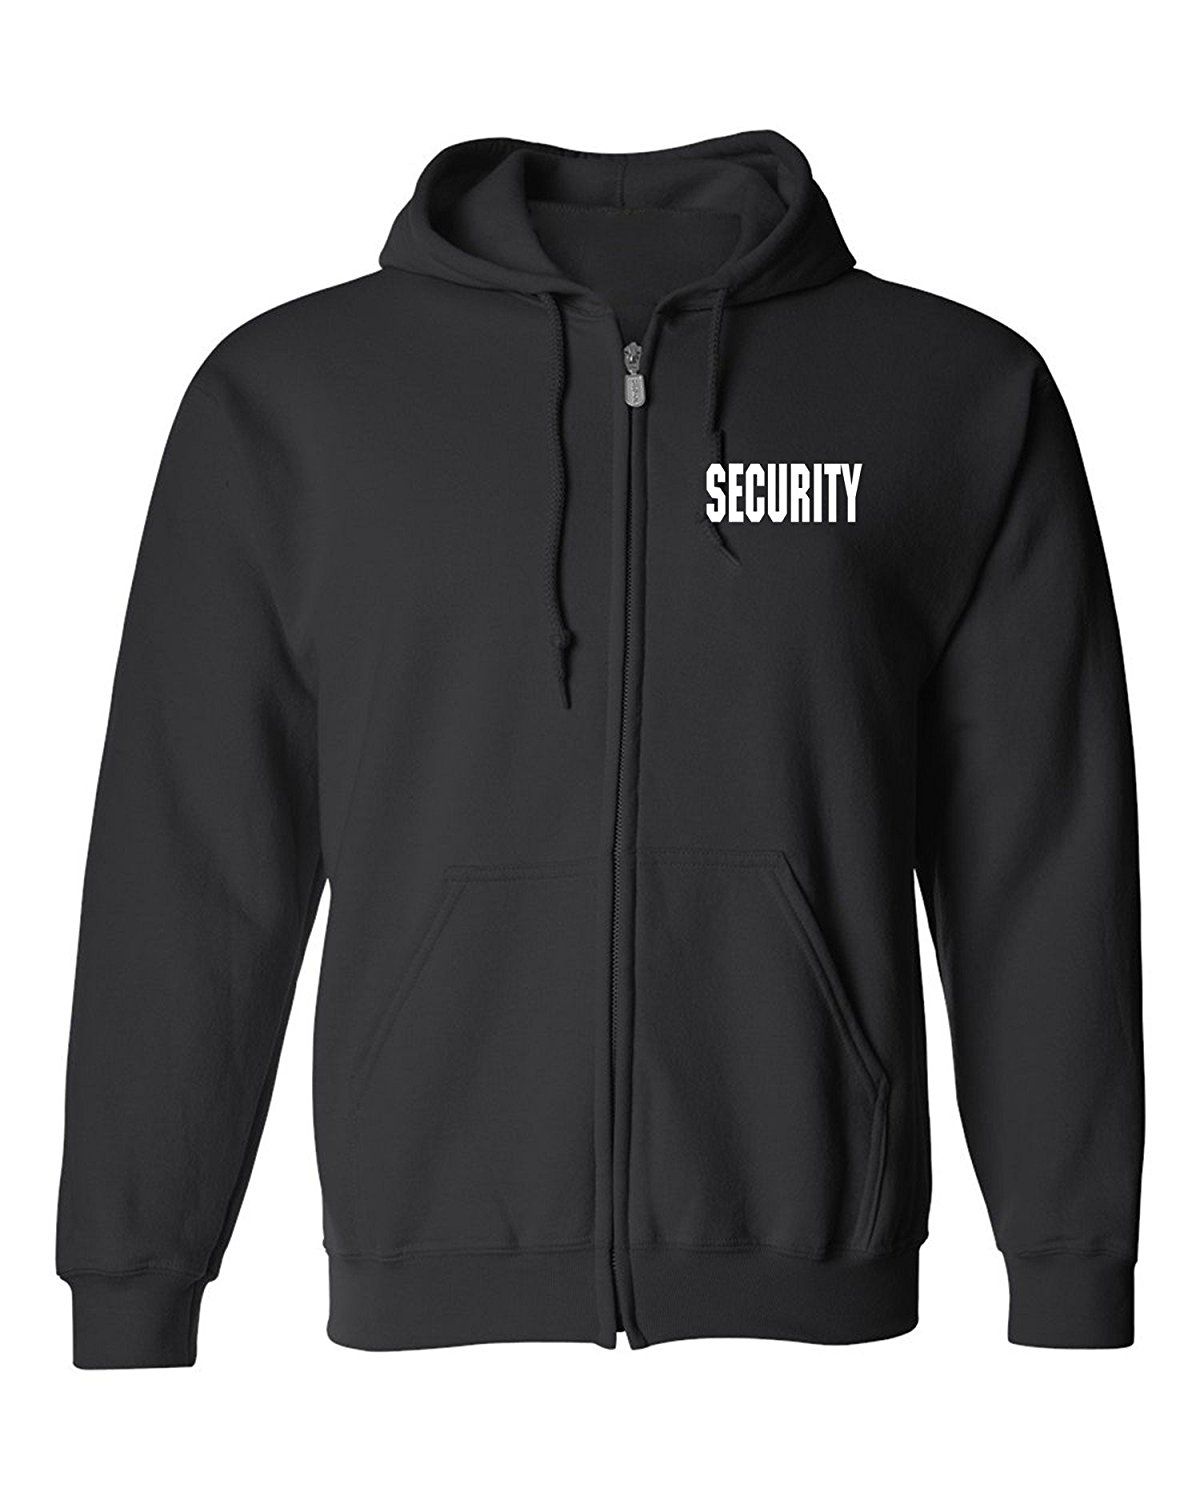 Security Zippered Hoodie Sweater